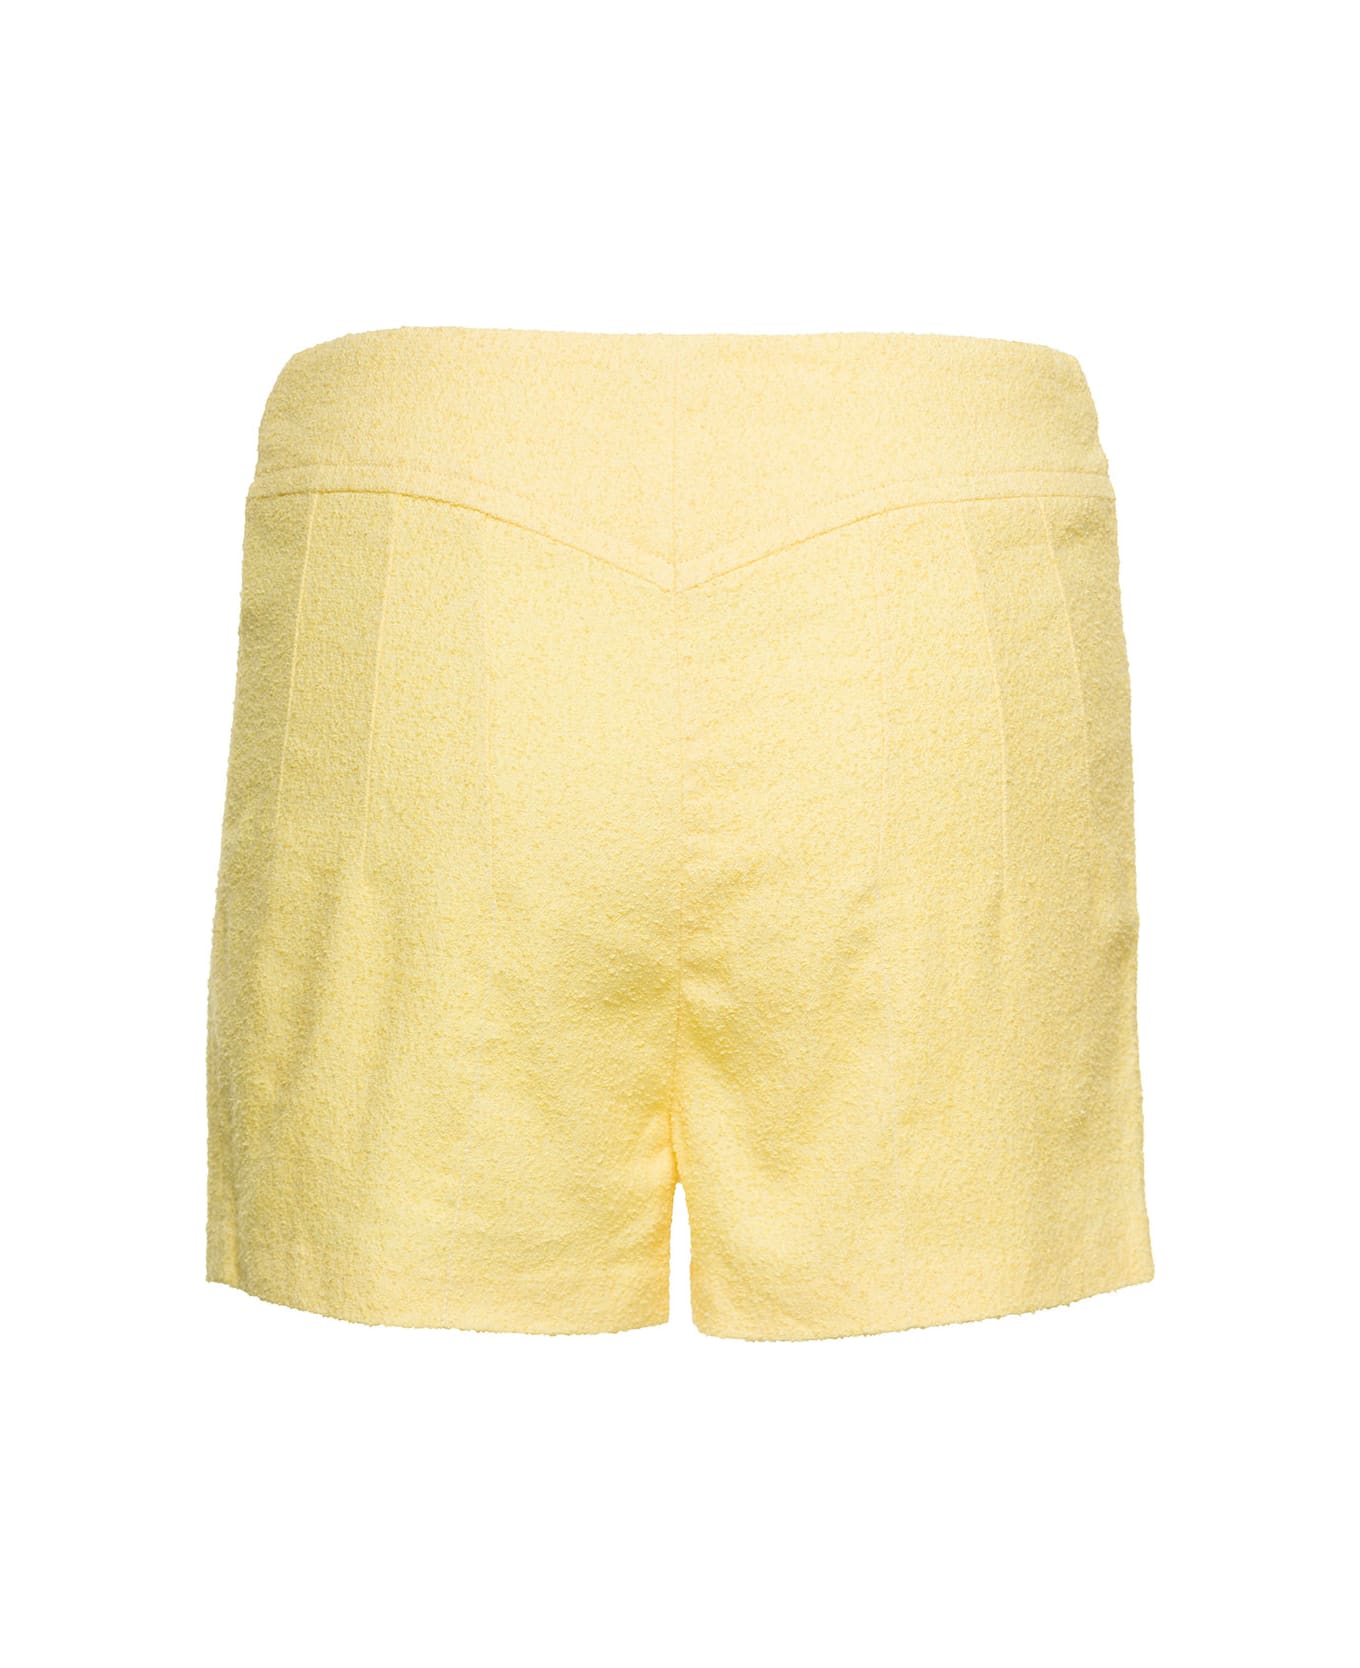 Patou Yellow Tailored Shorts With Double Zip In Cotton Blend Woman - Yellow ショートパンツ